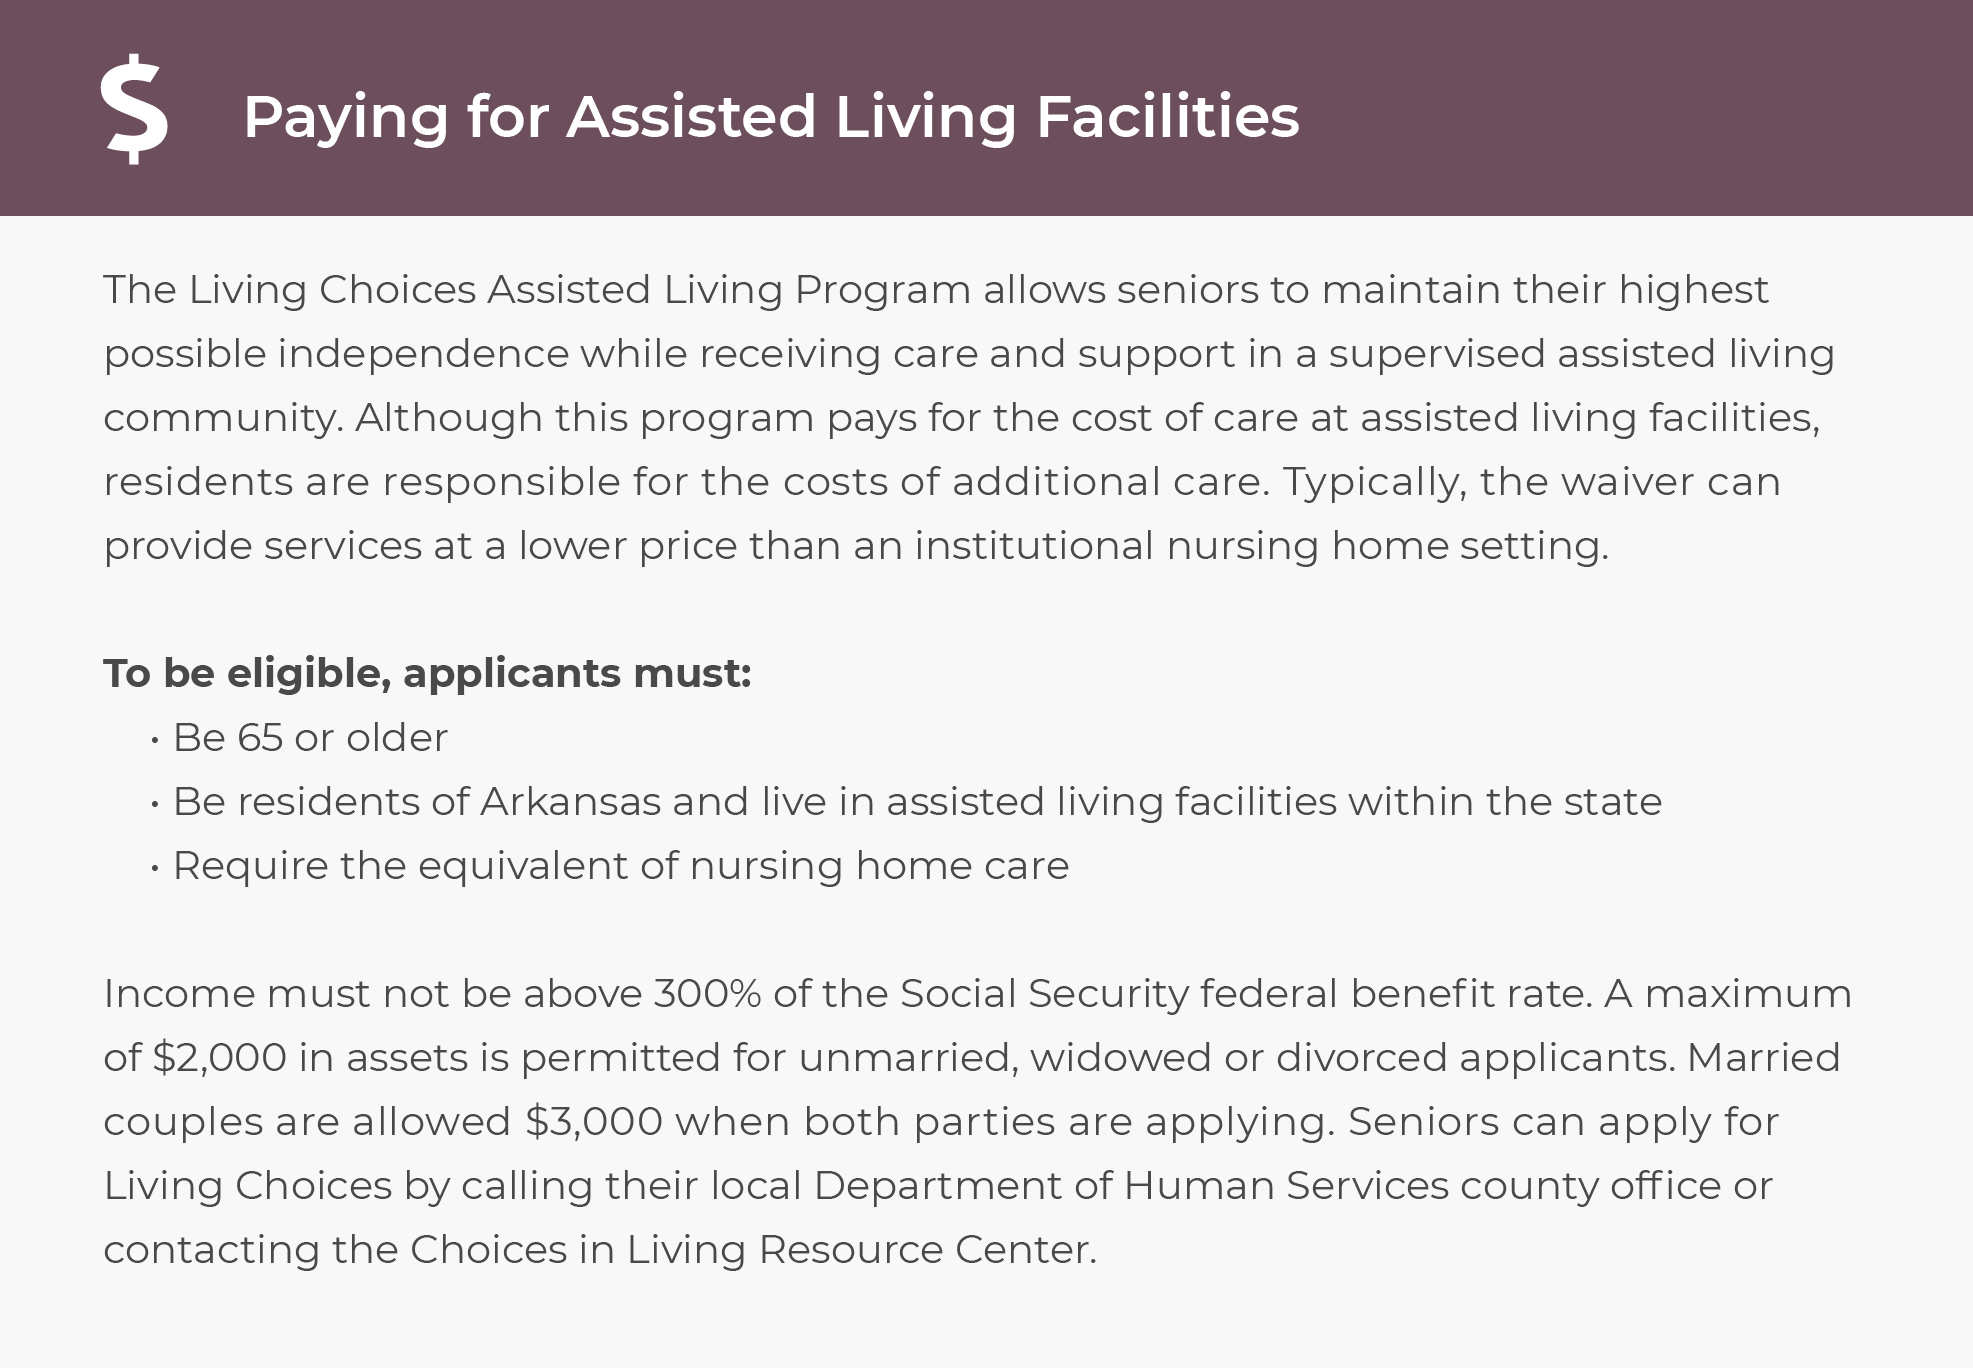 Paying for assisted living in Arkansas